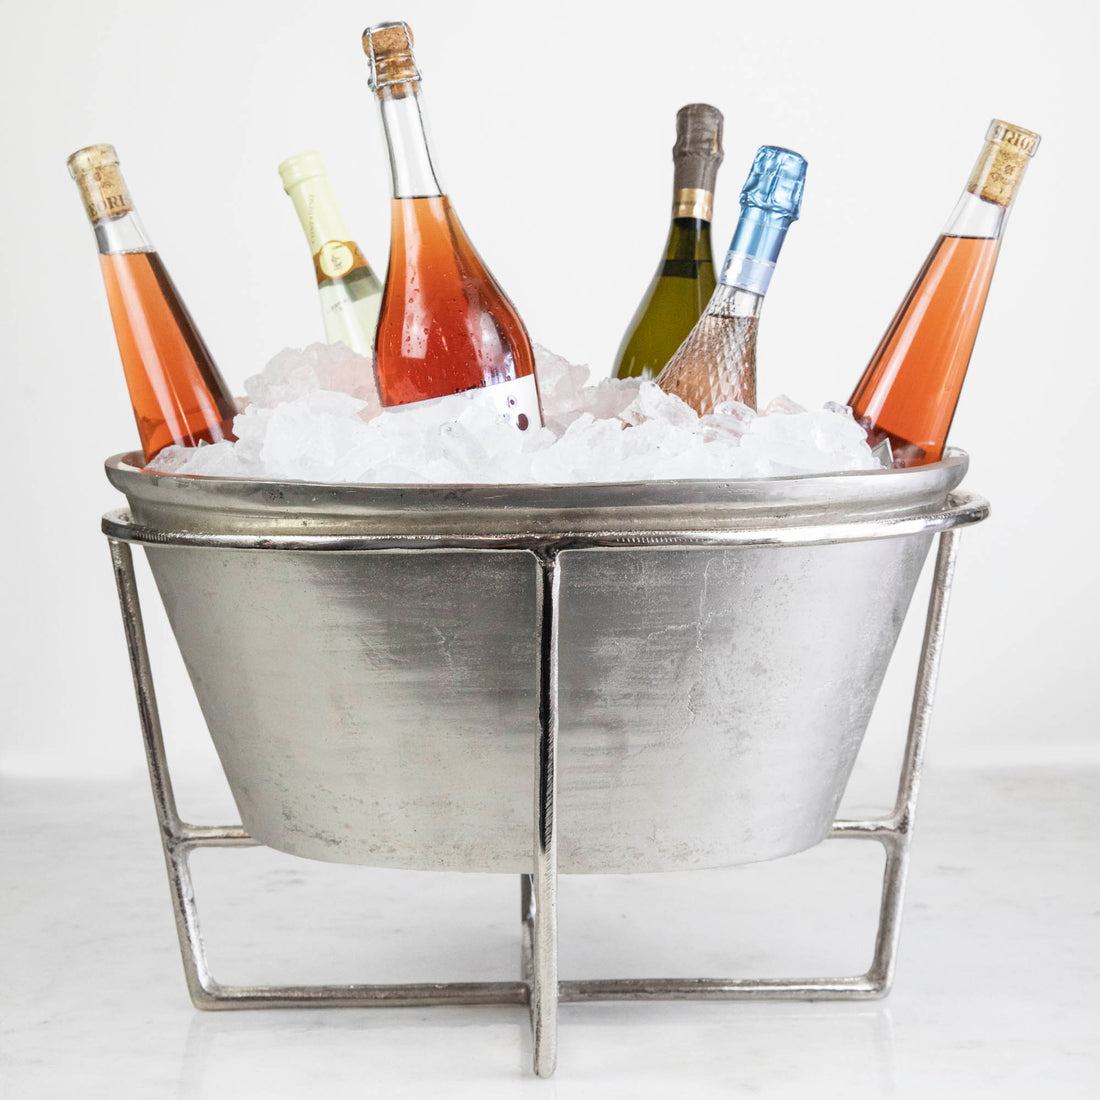 Extra Large Nickel Party Bucket on Stand